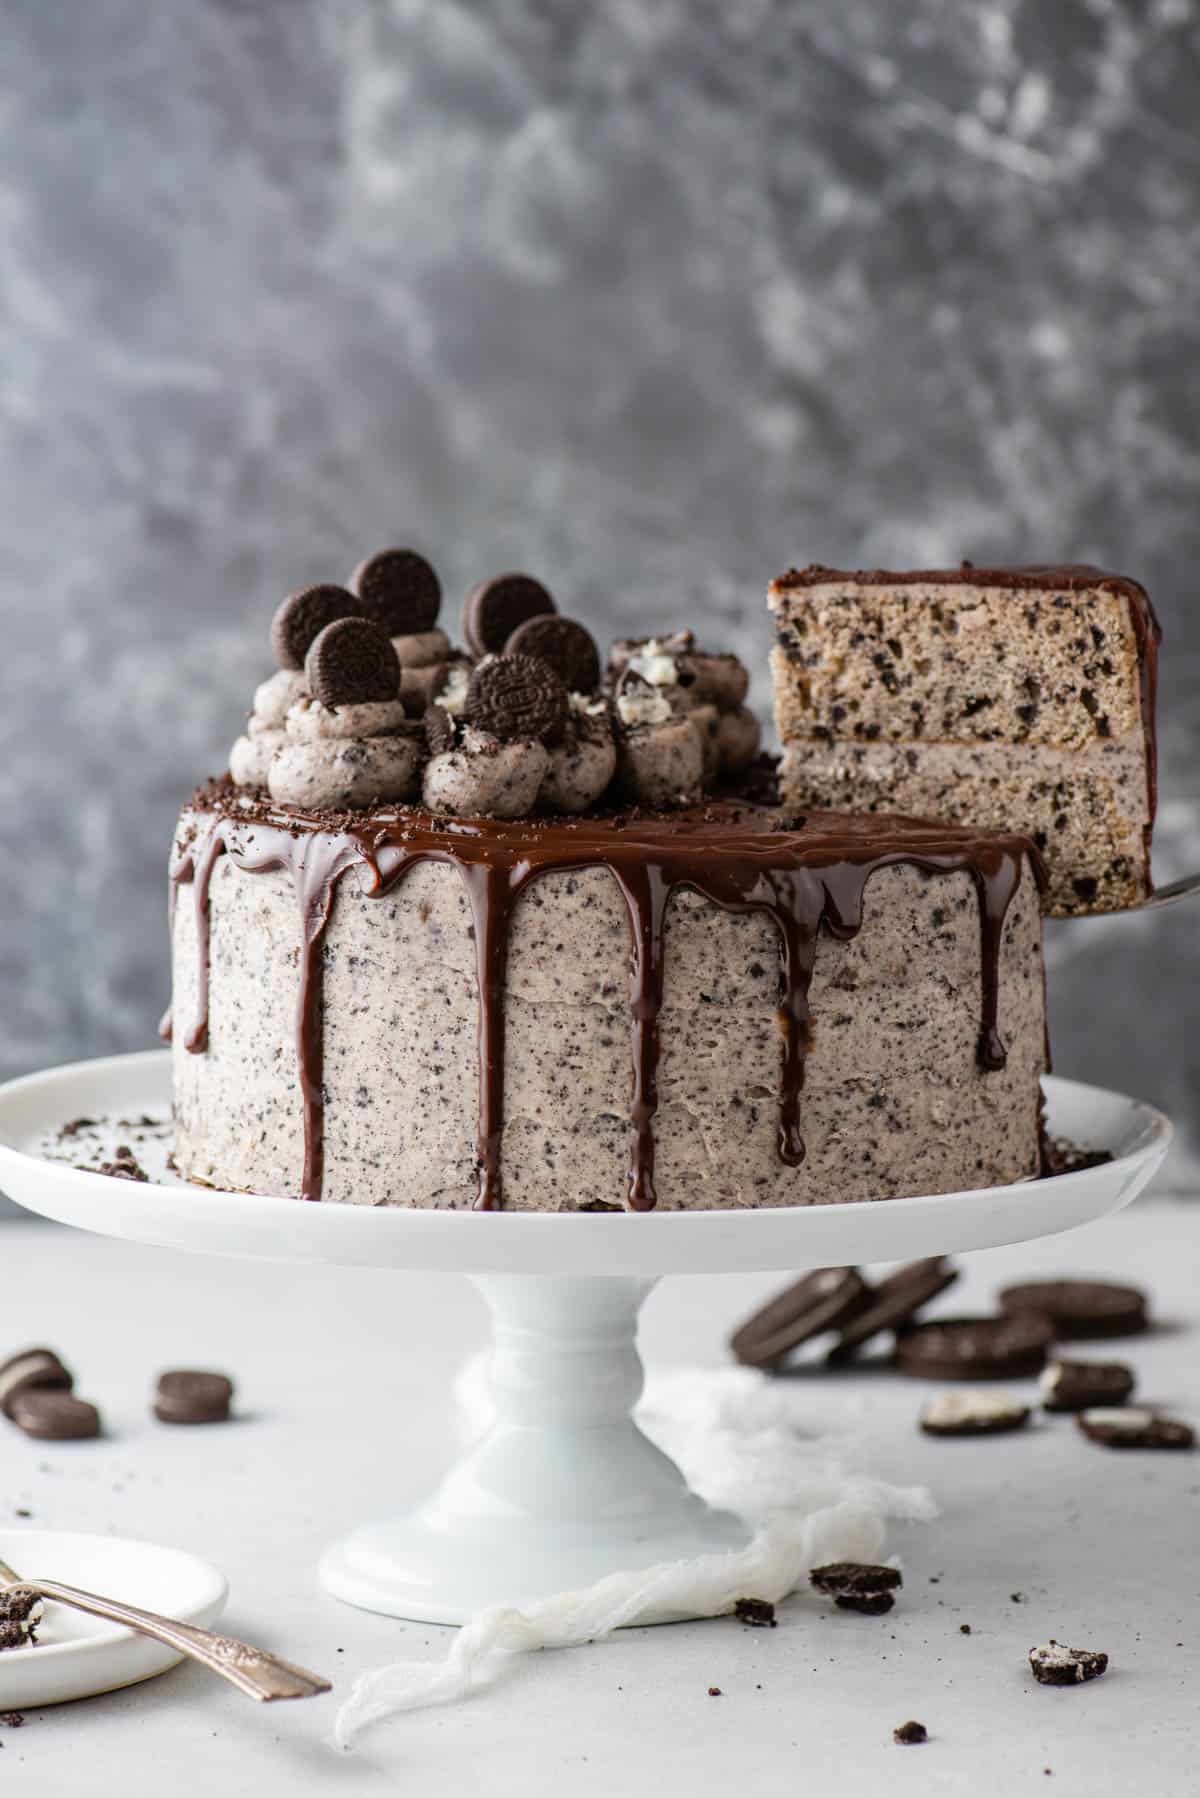 Whole Oreo cake on cake stand with slice being removed